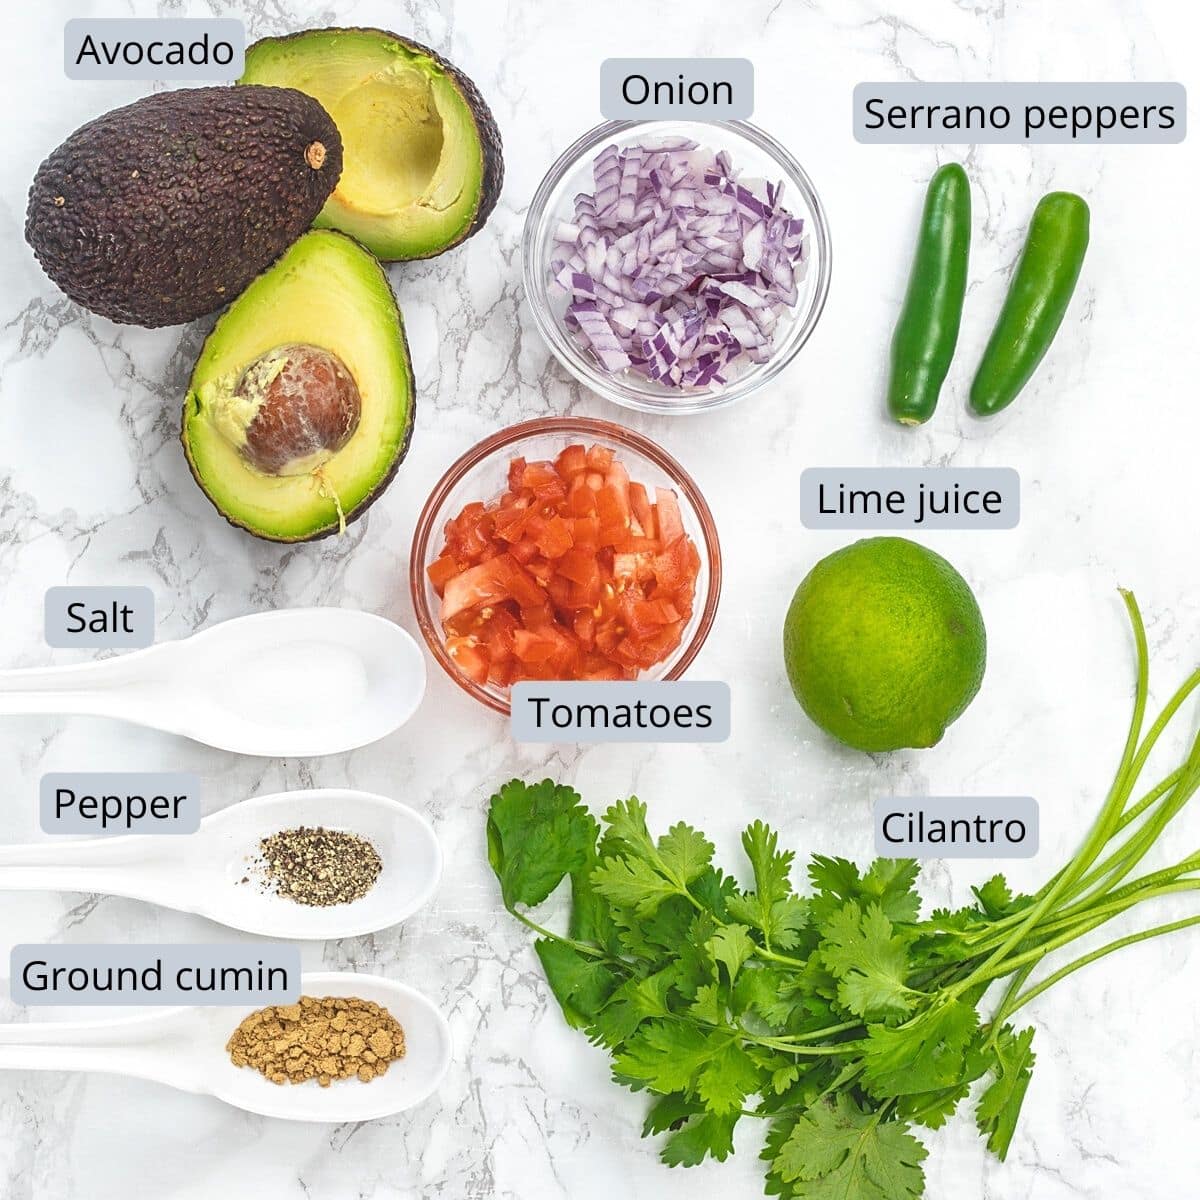 Ingredients for spicy guacamole in individual bowls, spoons and marble surface.